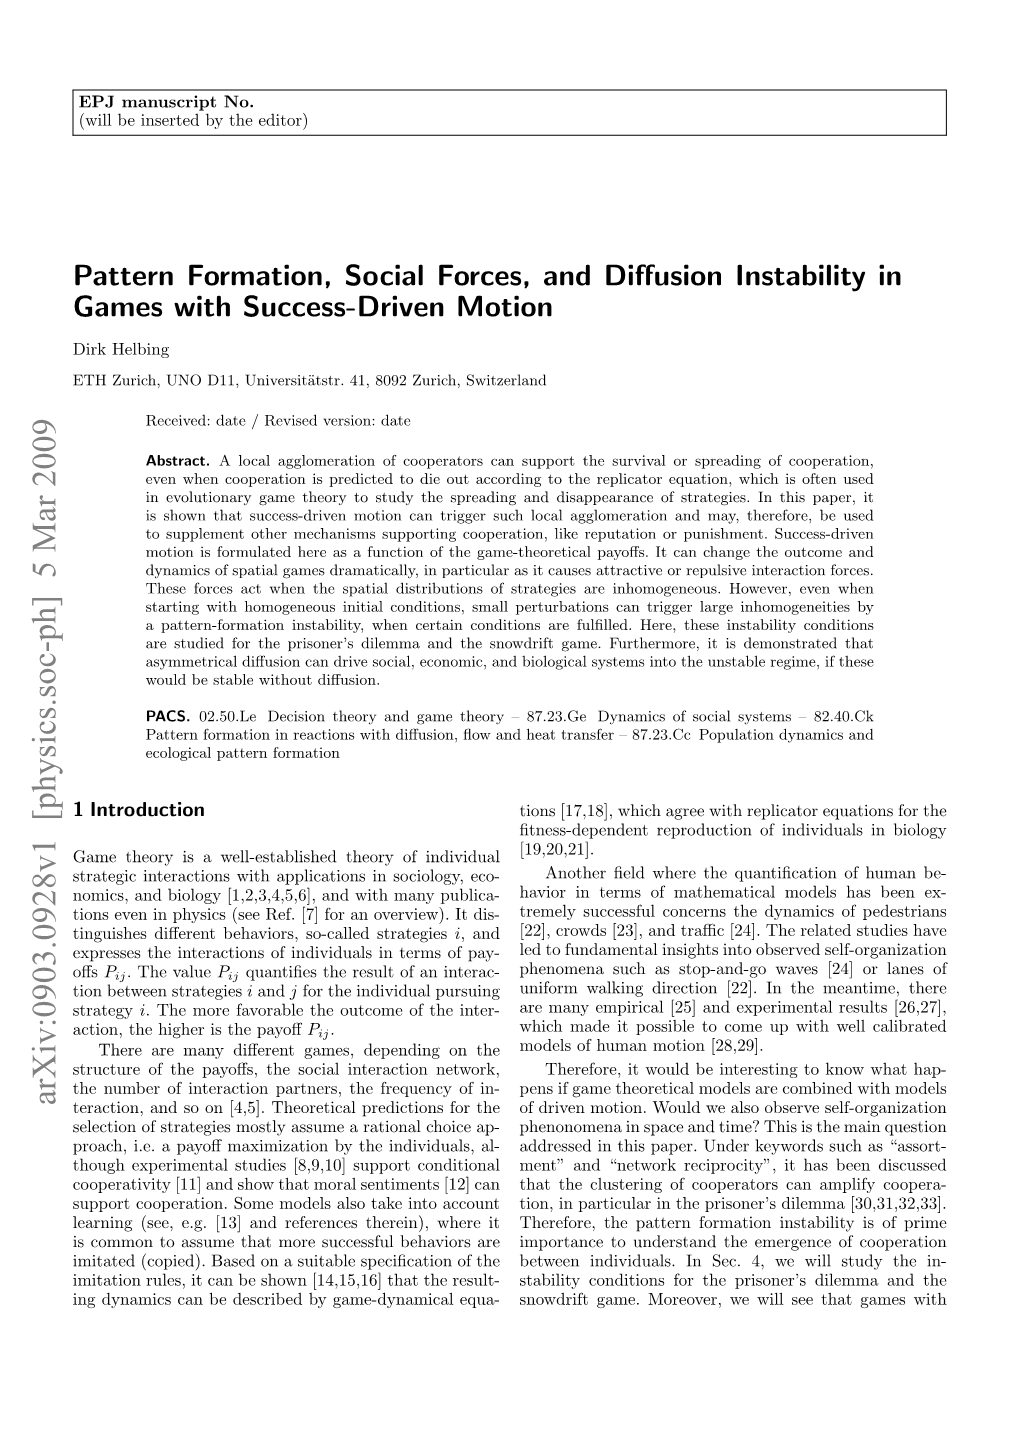 Pattern Formation, Social Forces, and Diffusion Instability in Games